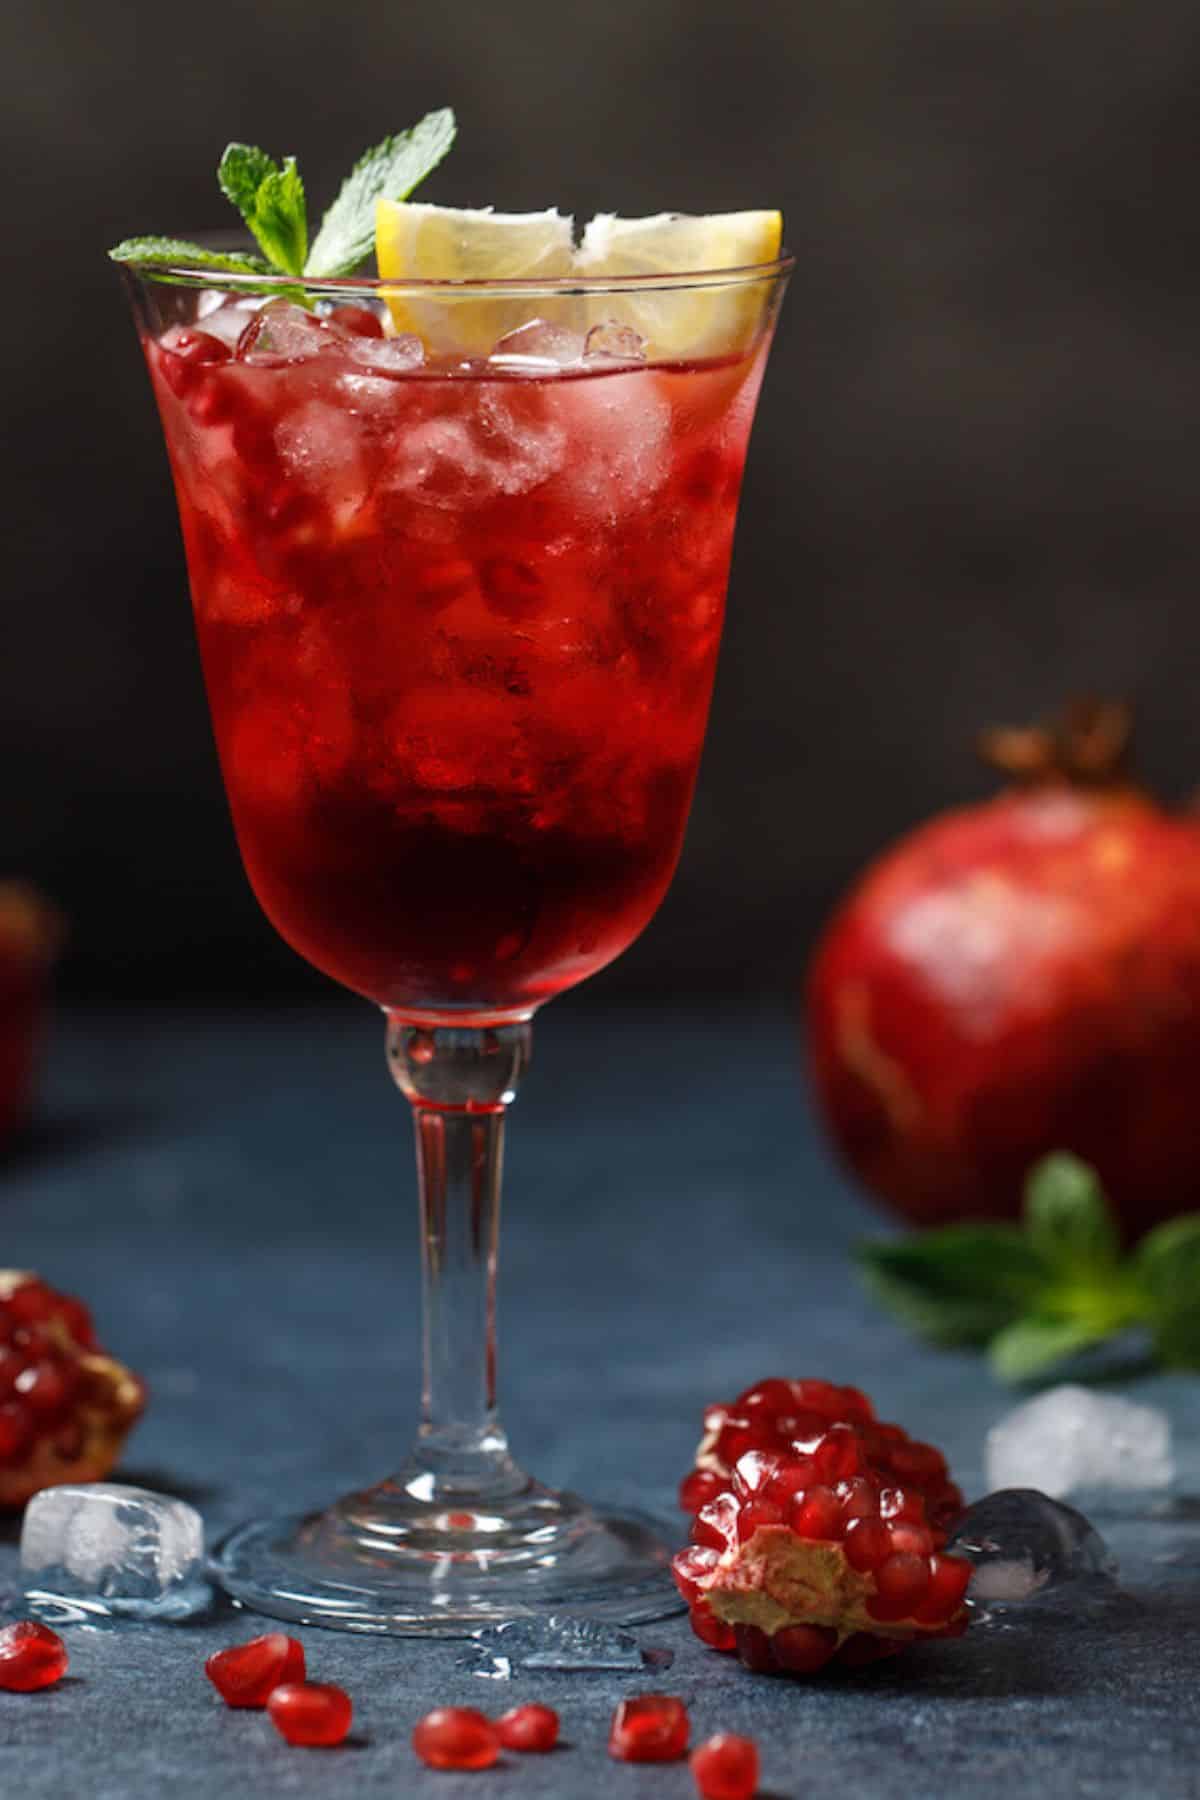 pretty glass with pomegranate mocktail served with a slice of lemon.